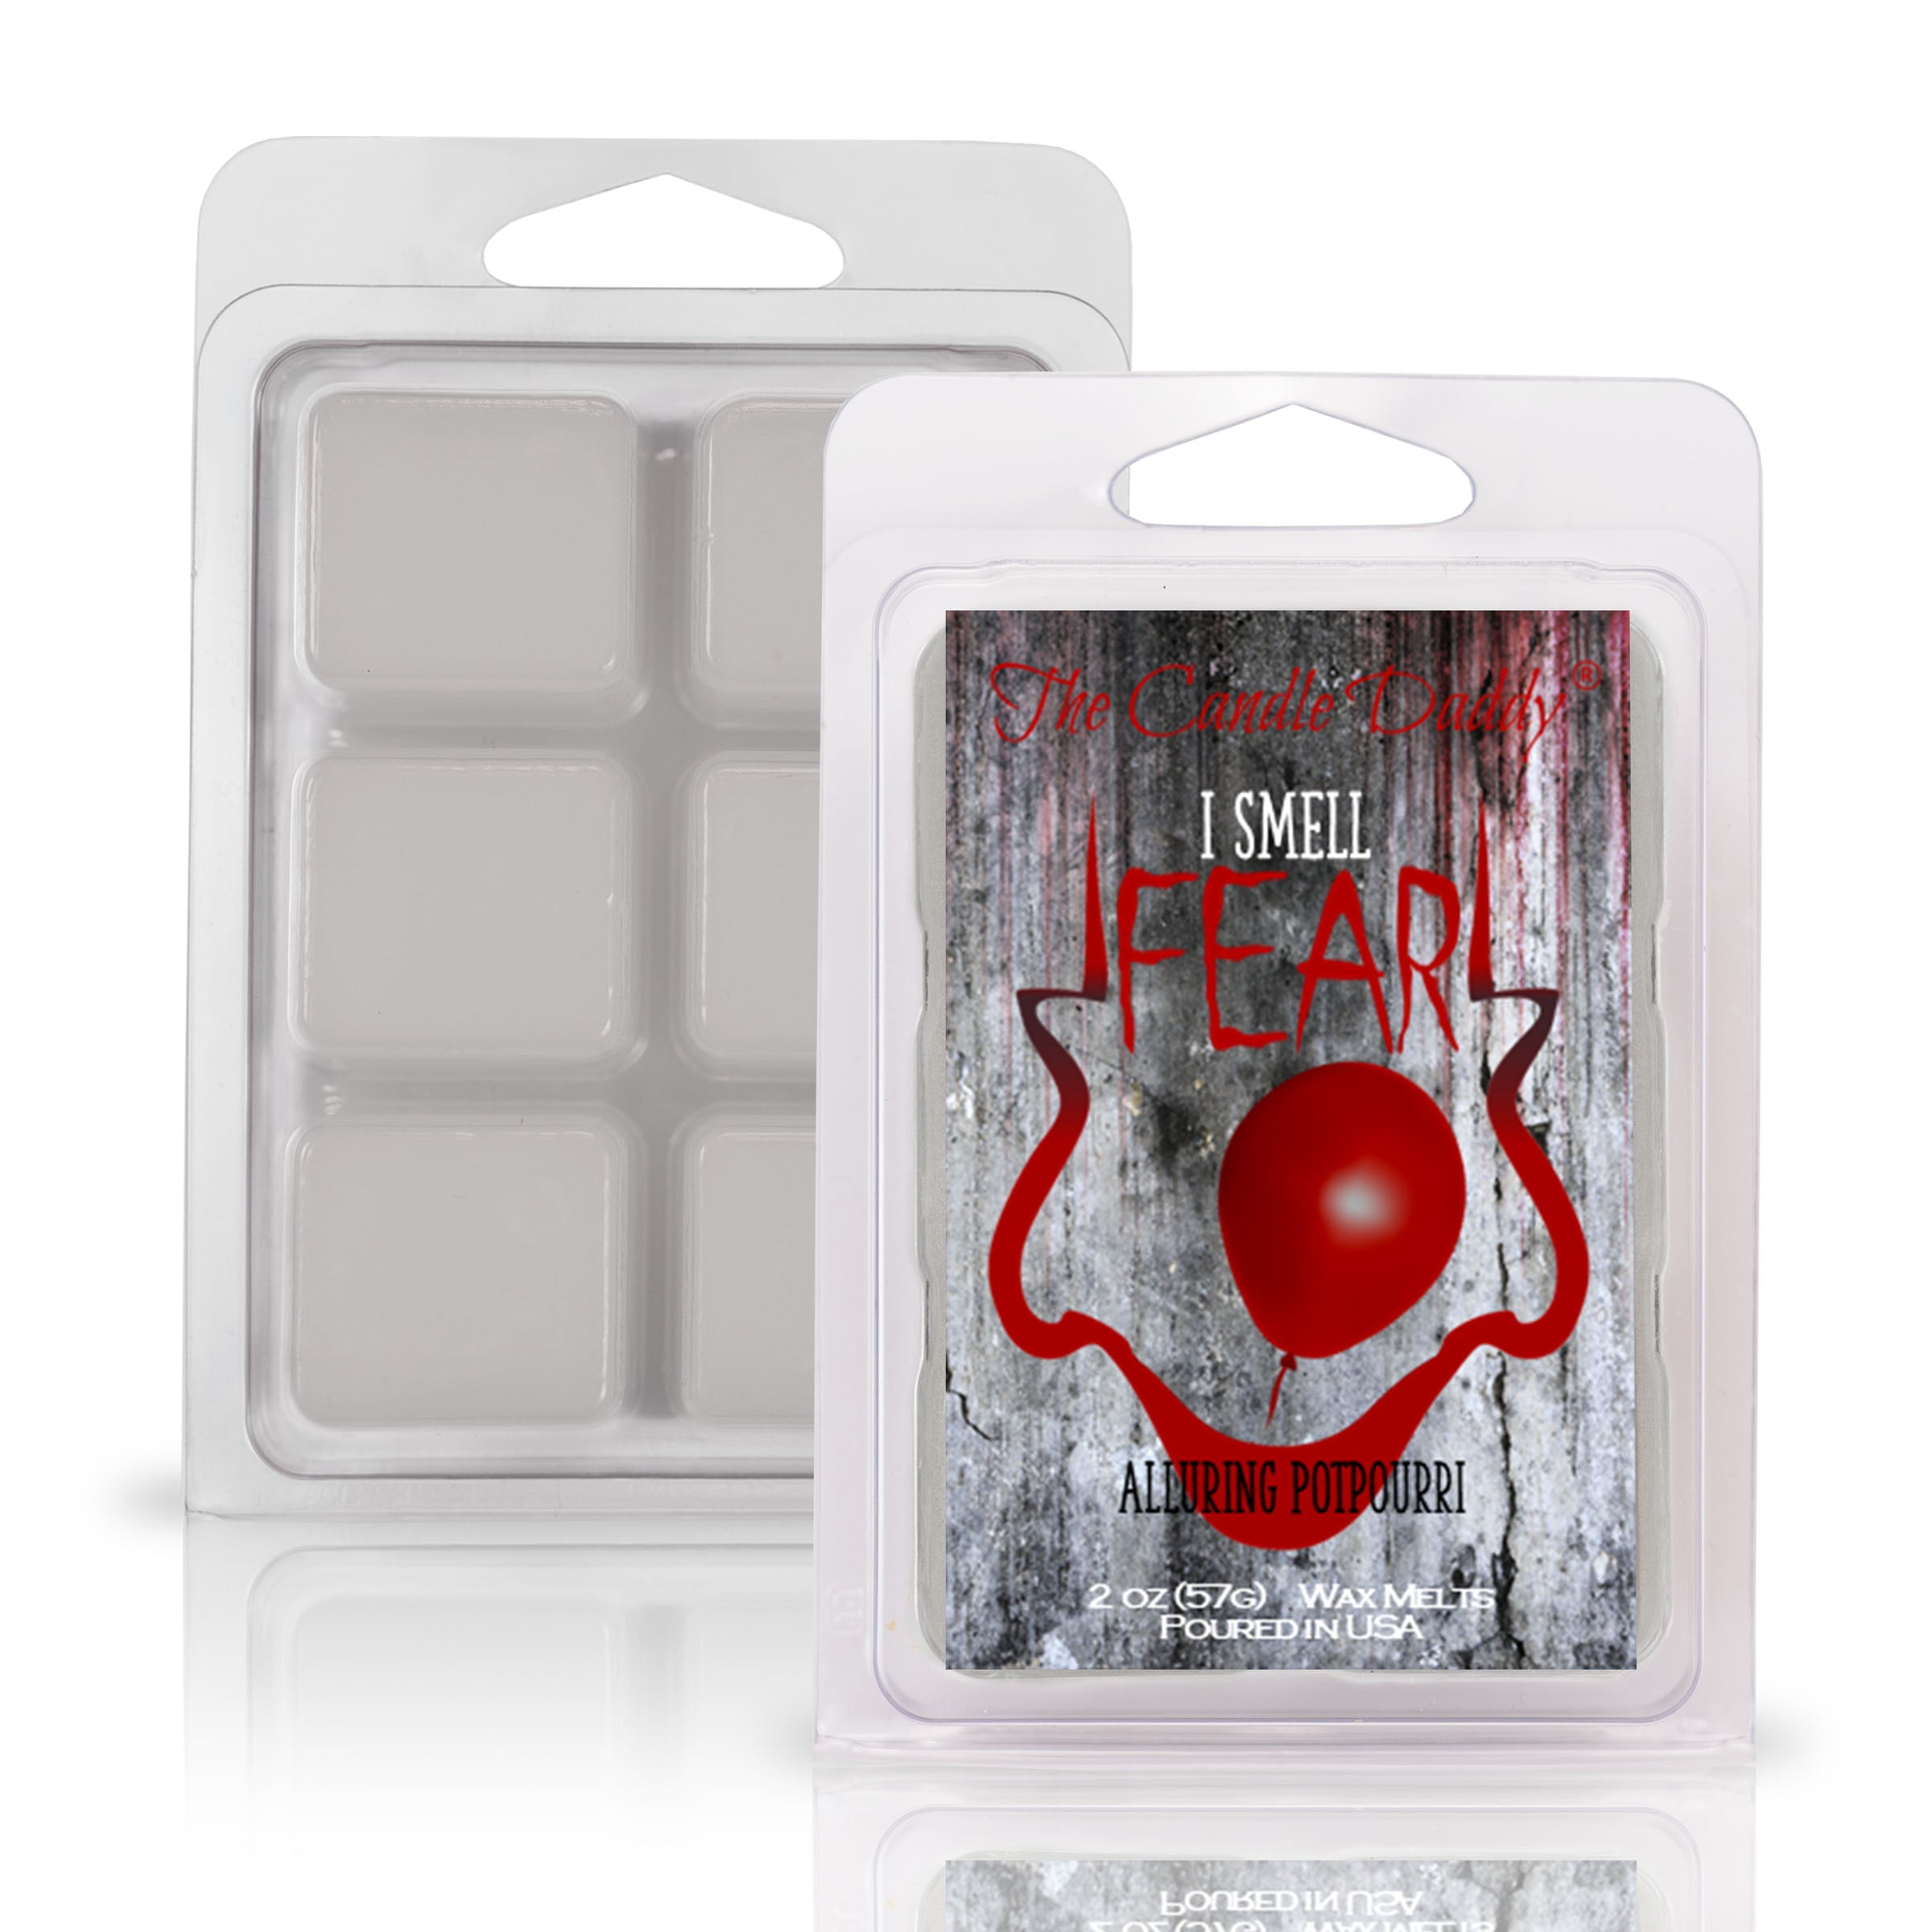 I Smell Fear - Alluring Potpourri Scented Movie Wax Melt - 1 Pack - 2 Ounces - 6 Cubes - Walmart.com